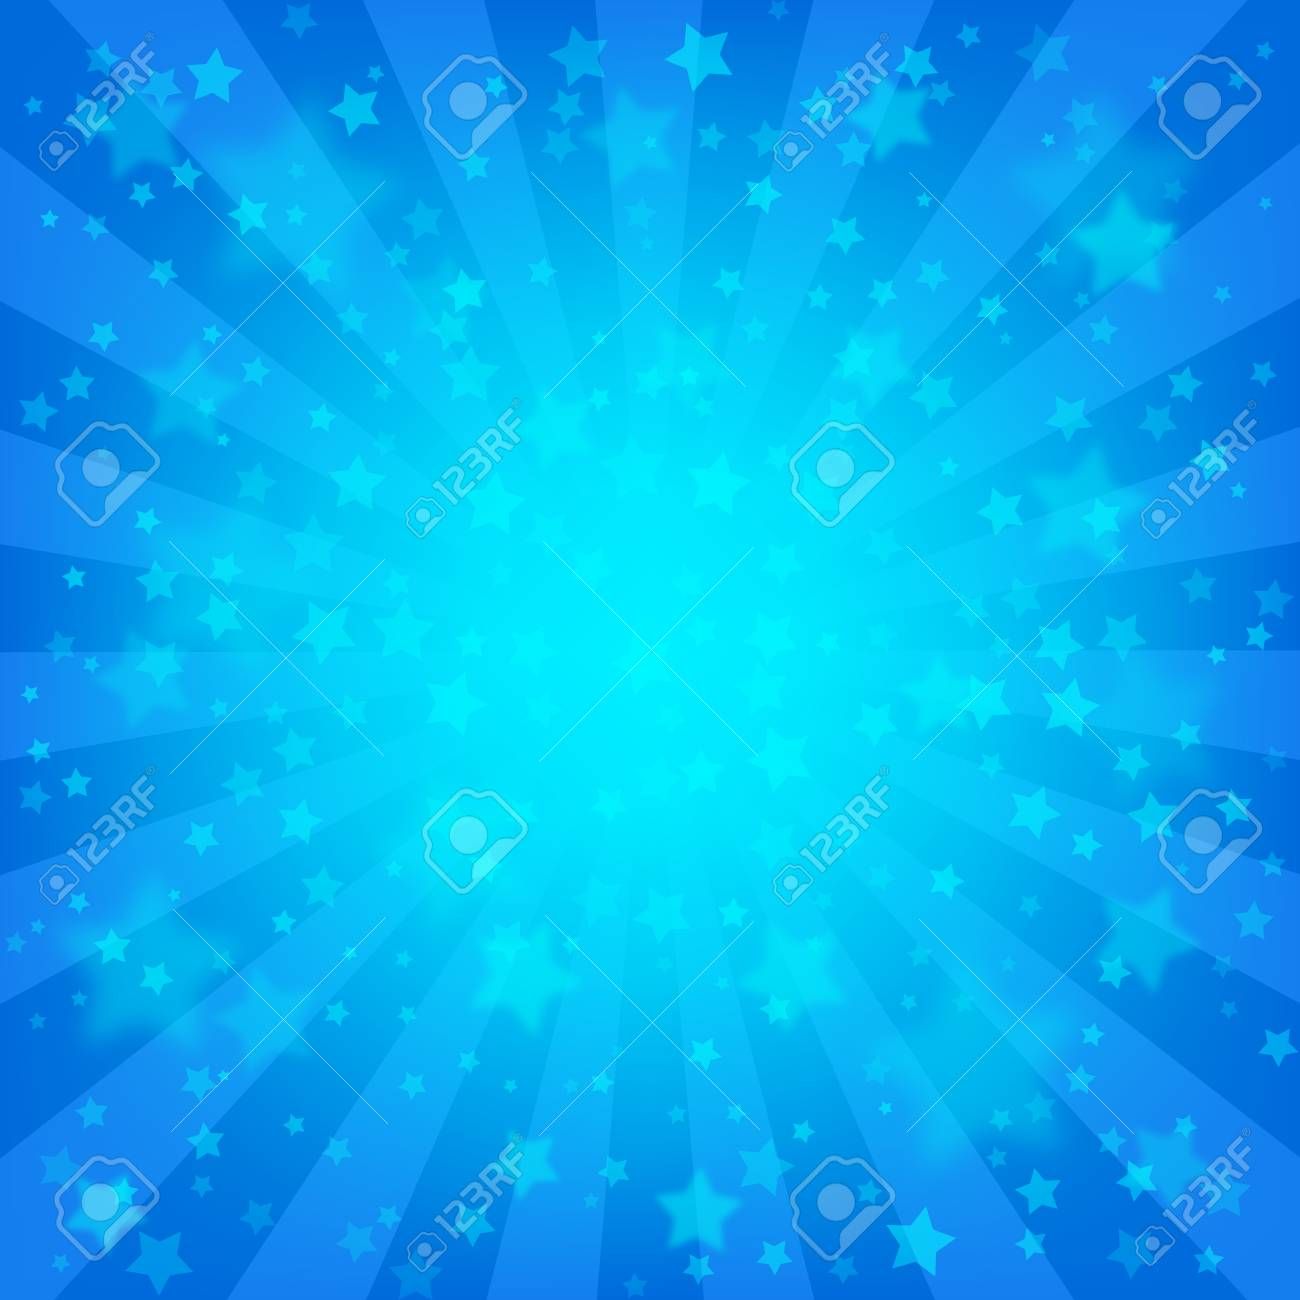 Free Download Bright Blue Rays Background Lot Of Stars Vivid Wallpaper [1300x1300] For Your Desktop, Mobile & Tablet. Explore Pop Wallpaper. Pop Wallpaper, Pop Music Wallpaper, K Pop BTS Wallpaper